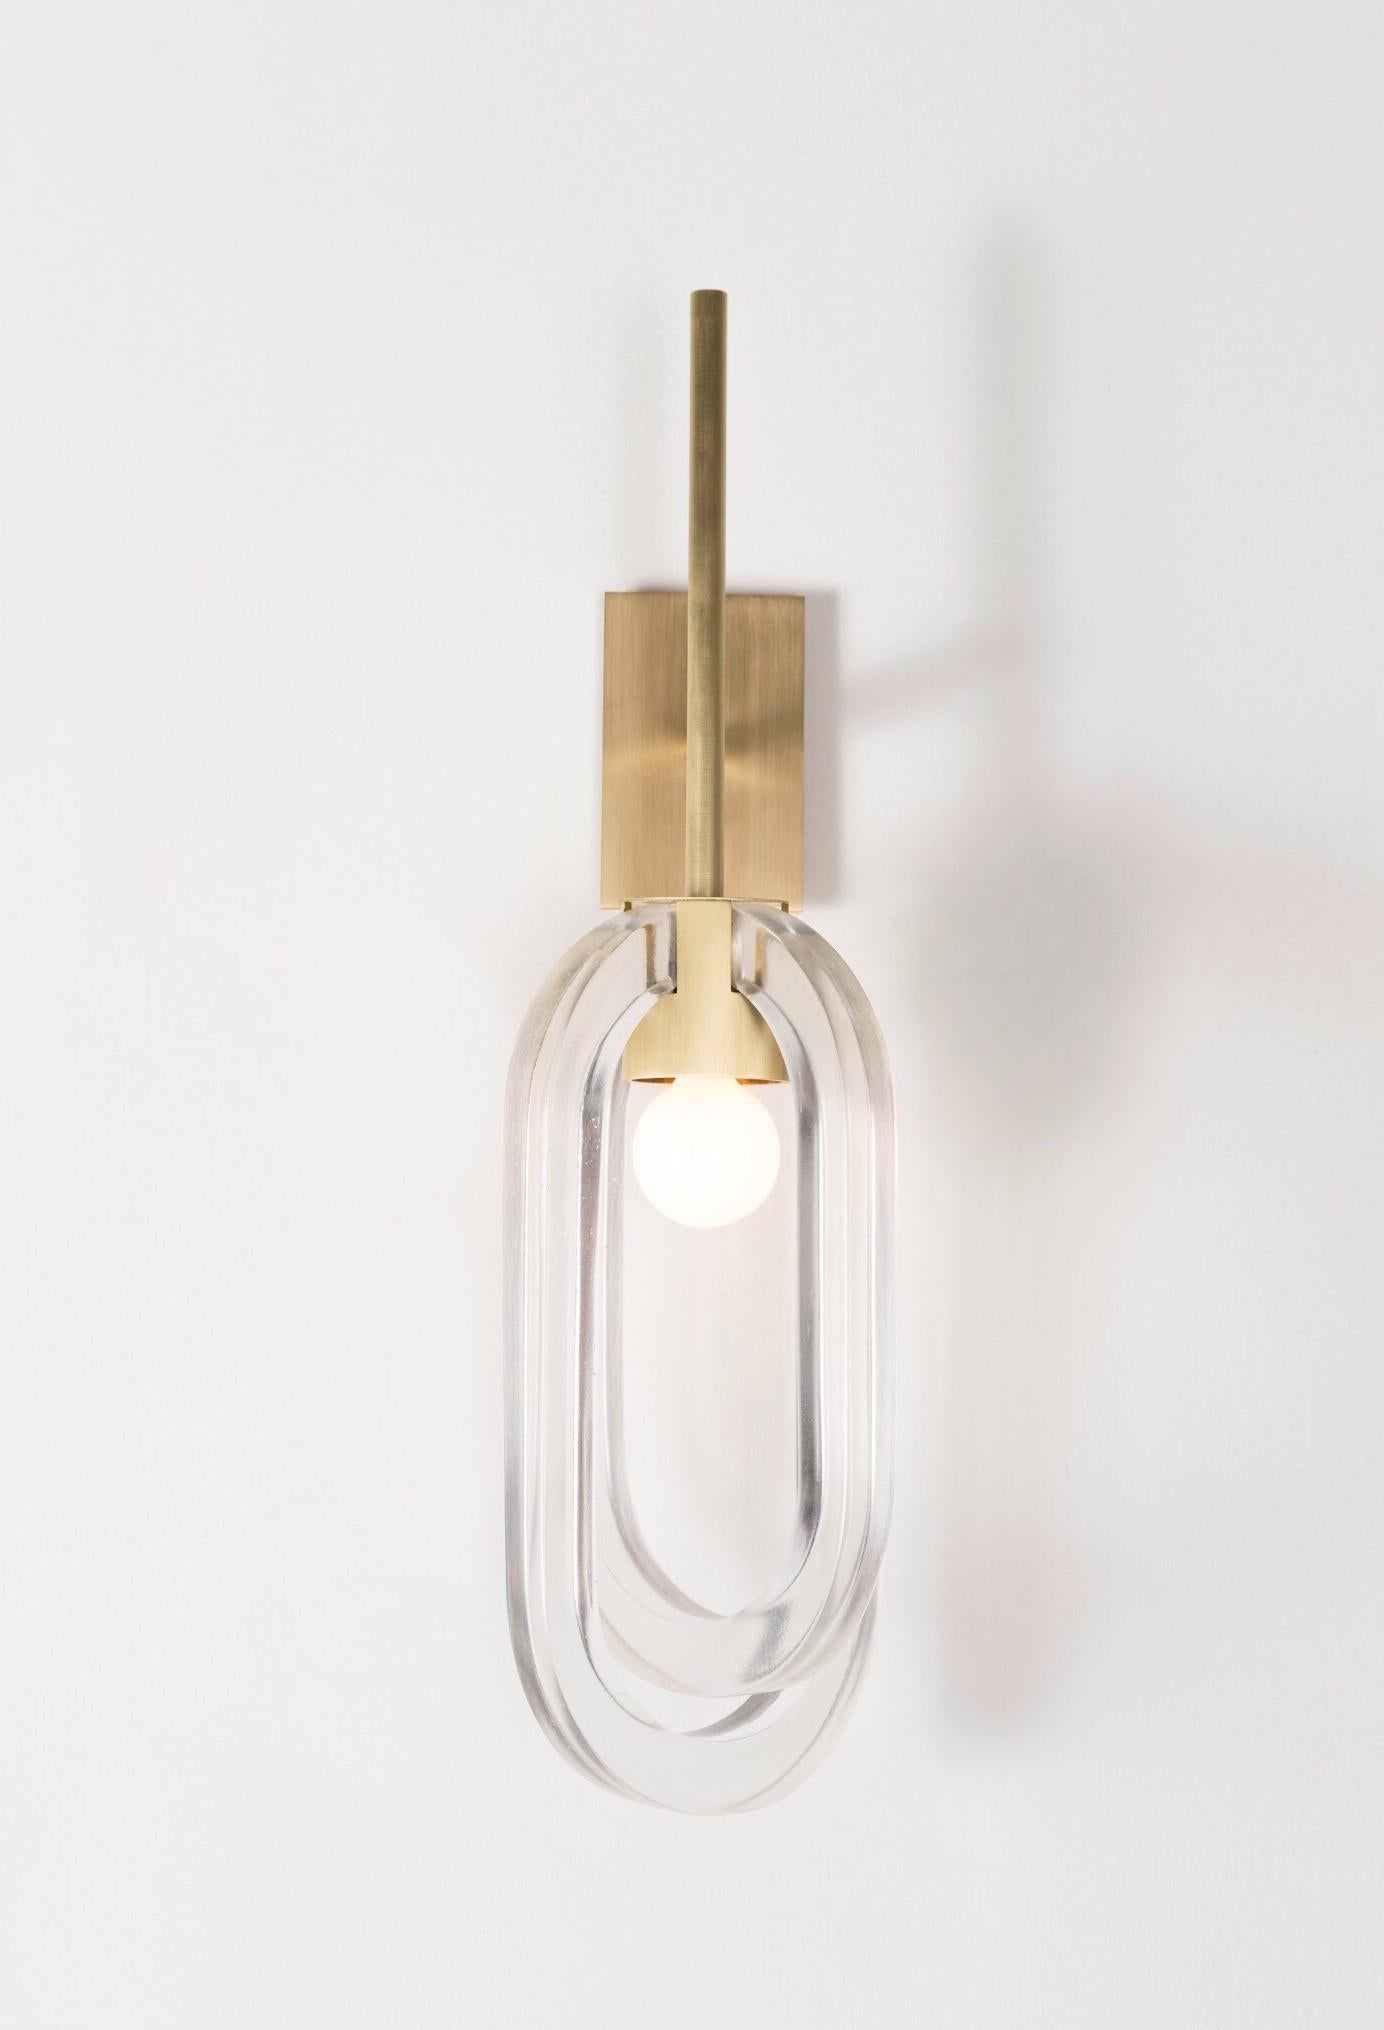 Two cast-resin rings, placed perpendicularly around a brushed-brass light source, each at varied lengths with one looping under the other to create a composed, jewel-like fixture. The fittings and mount are made of machined brass a fogged -dome